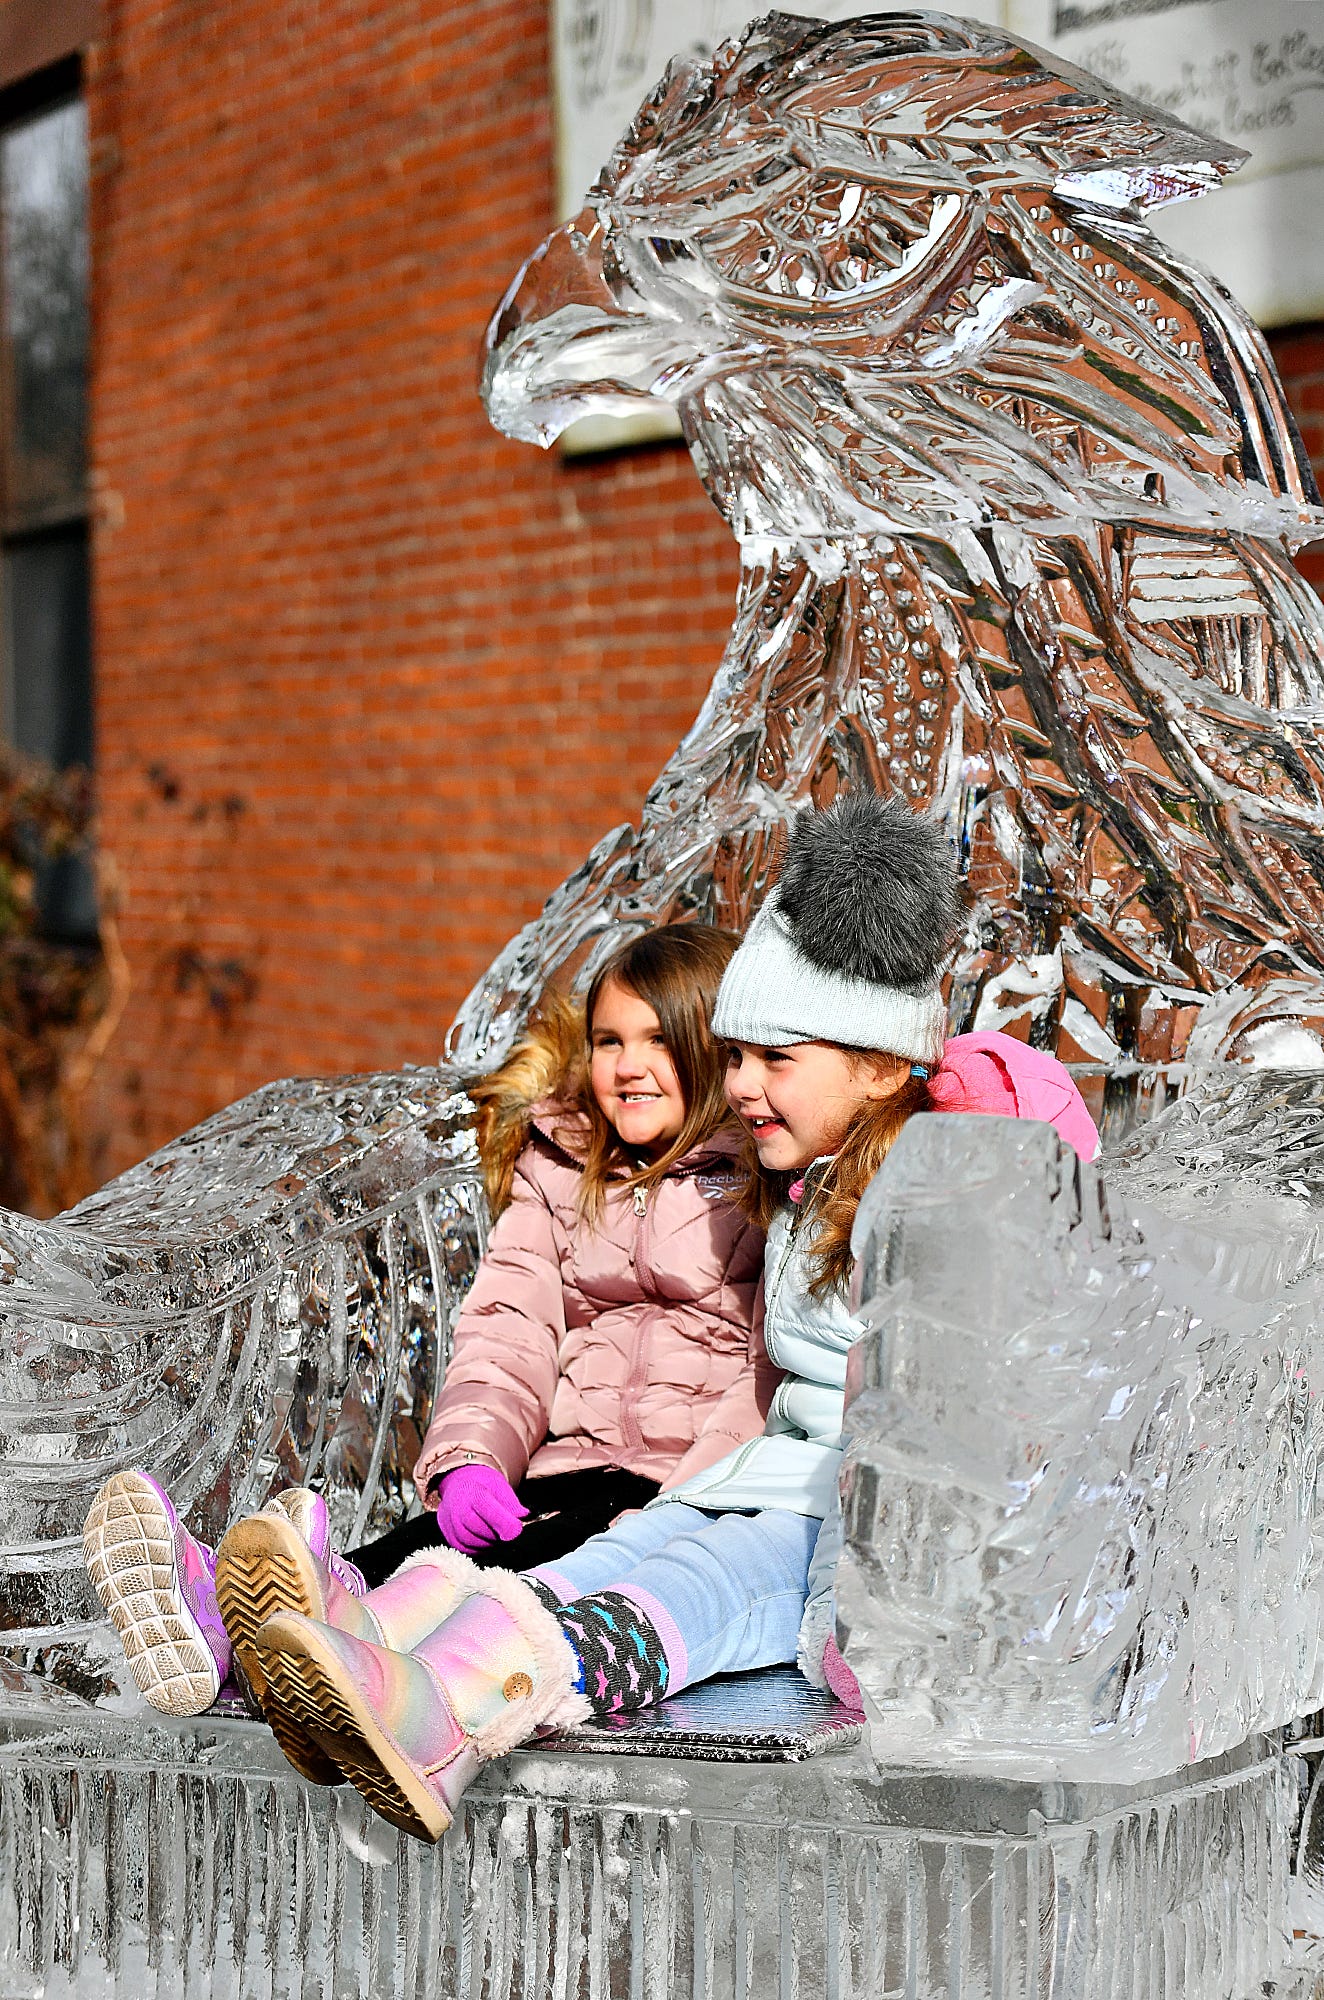 The 8th annual FestivICE event in downtown York City, Saturday, Jan. 15, 2022. Dawn J. Sagert photo